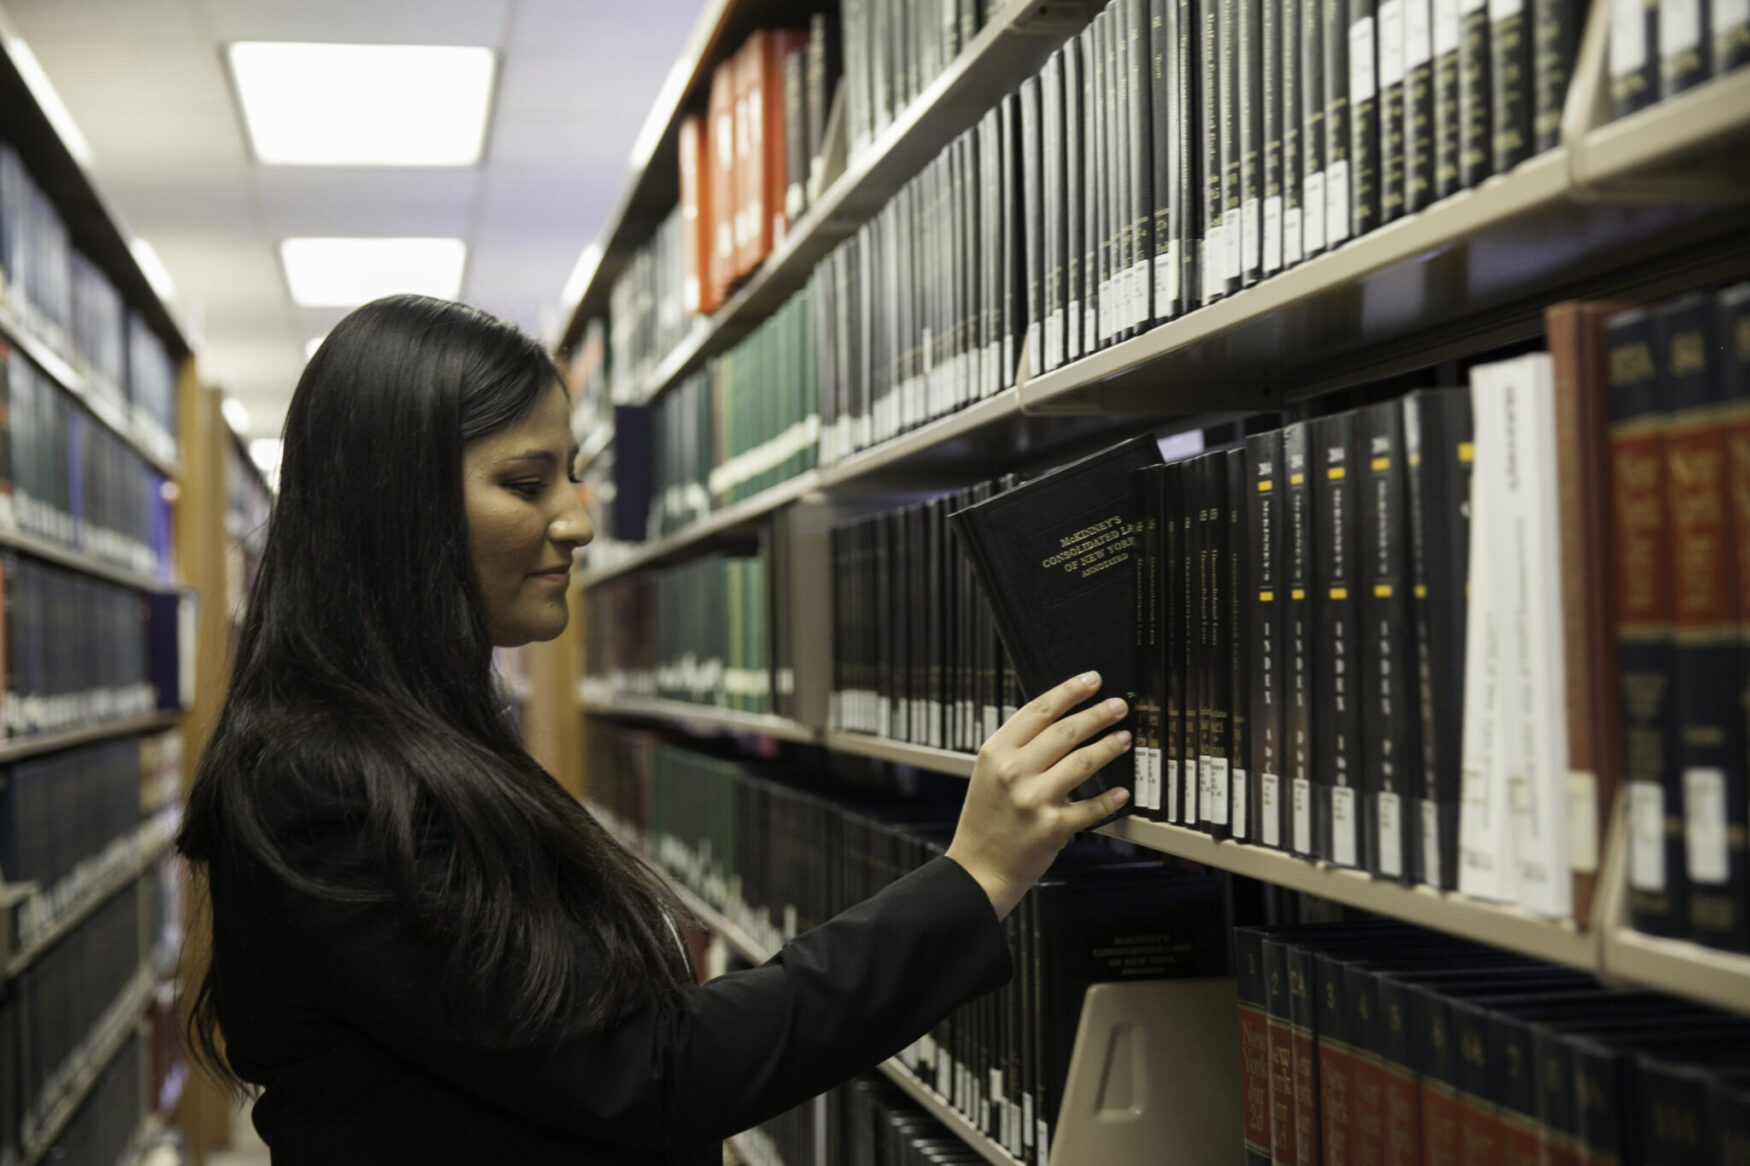 Female student taking a book from a library shelf